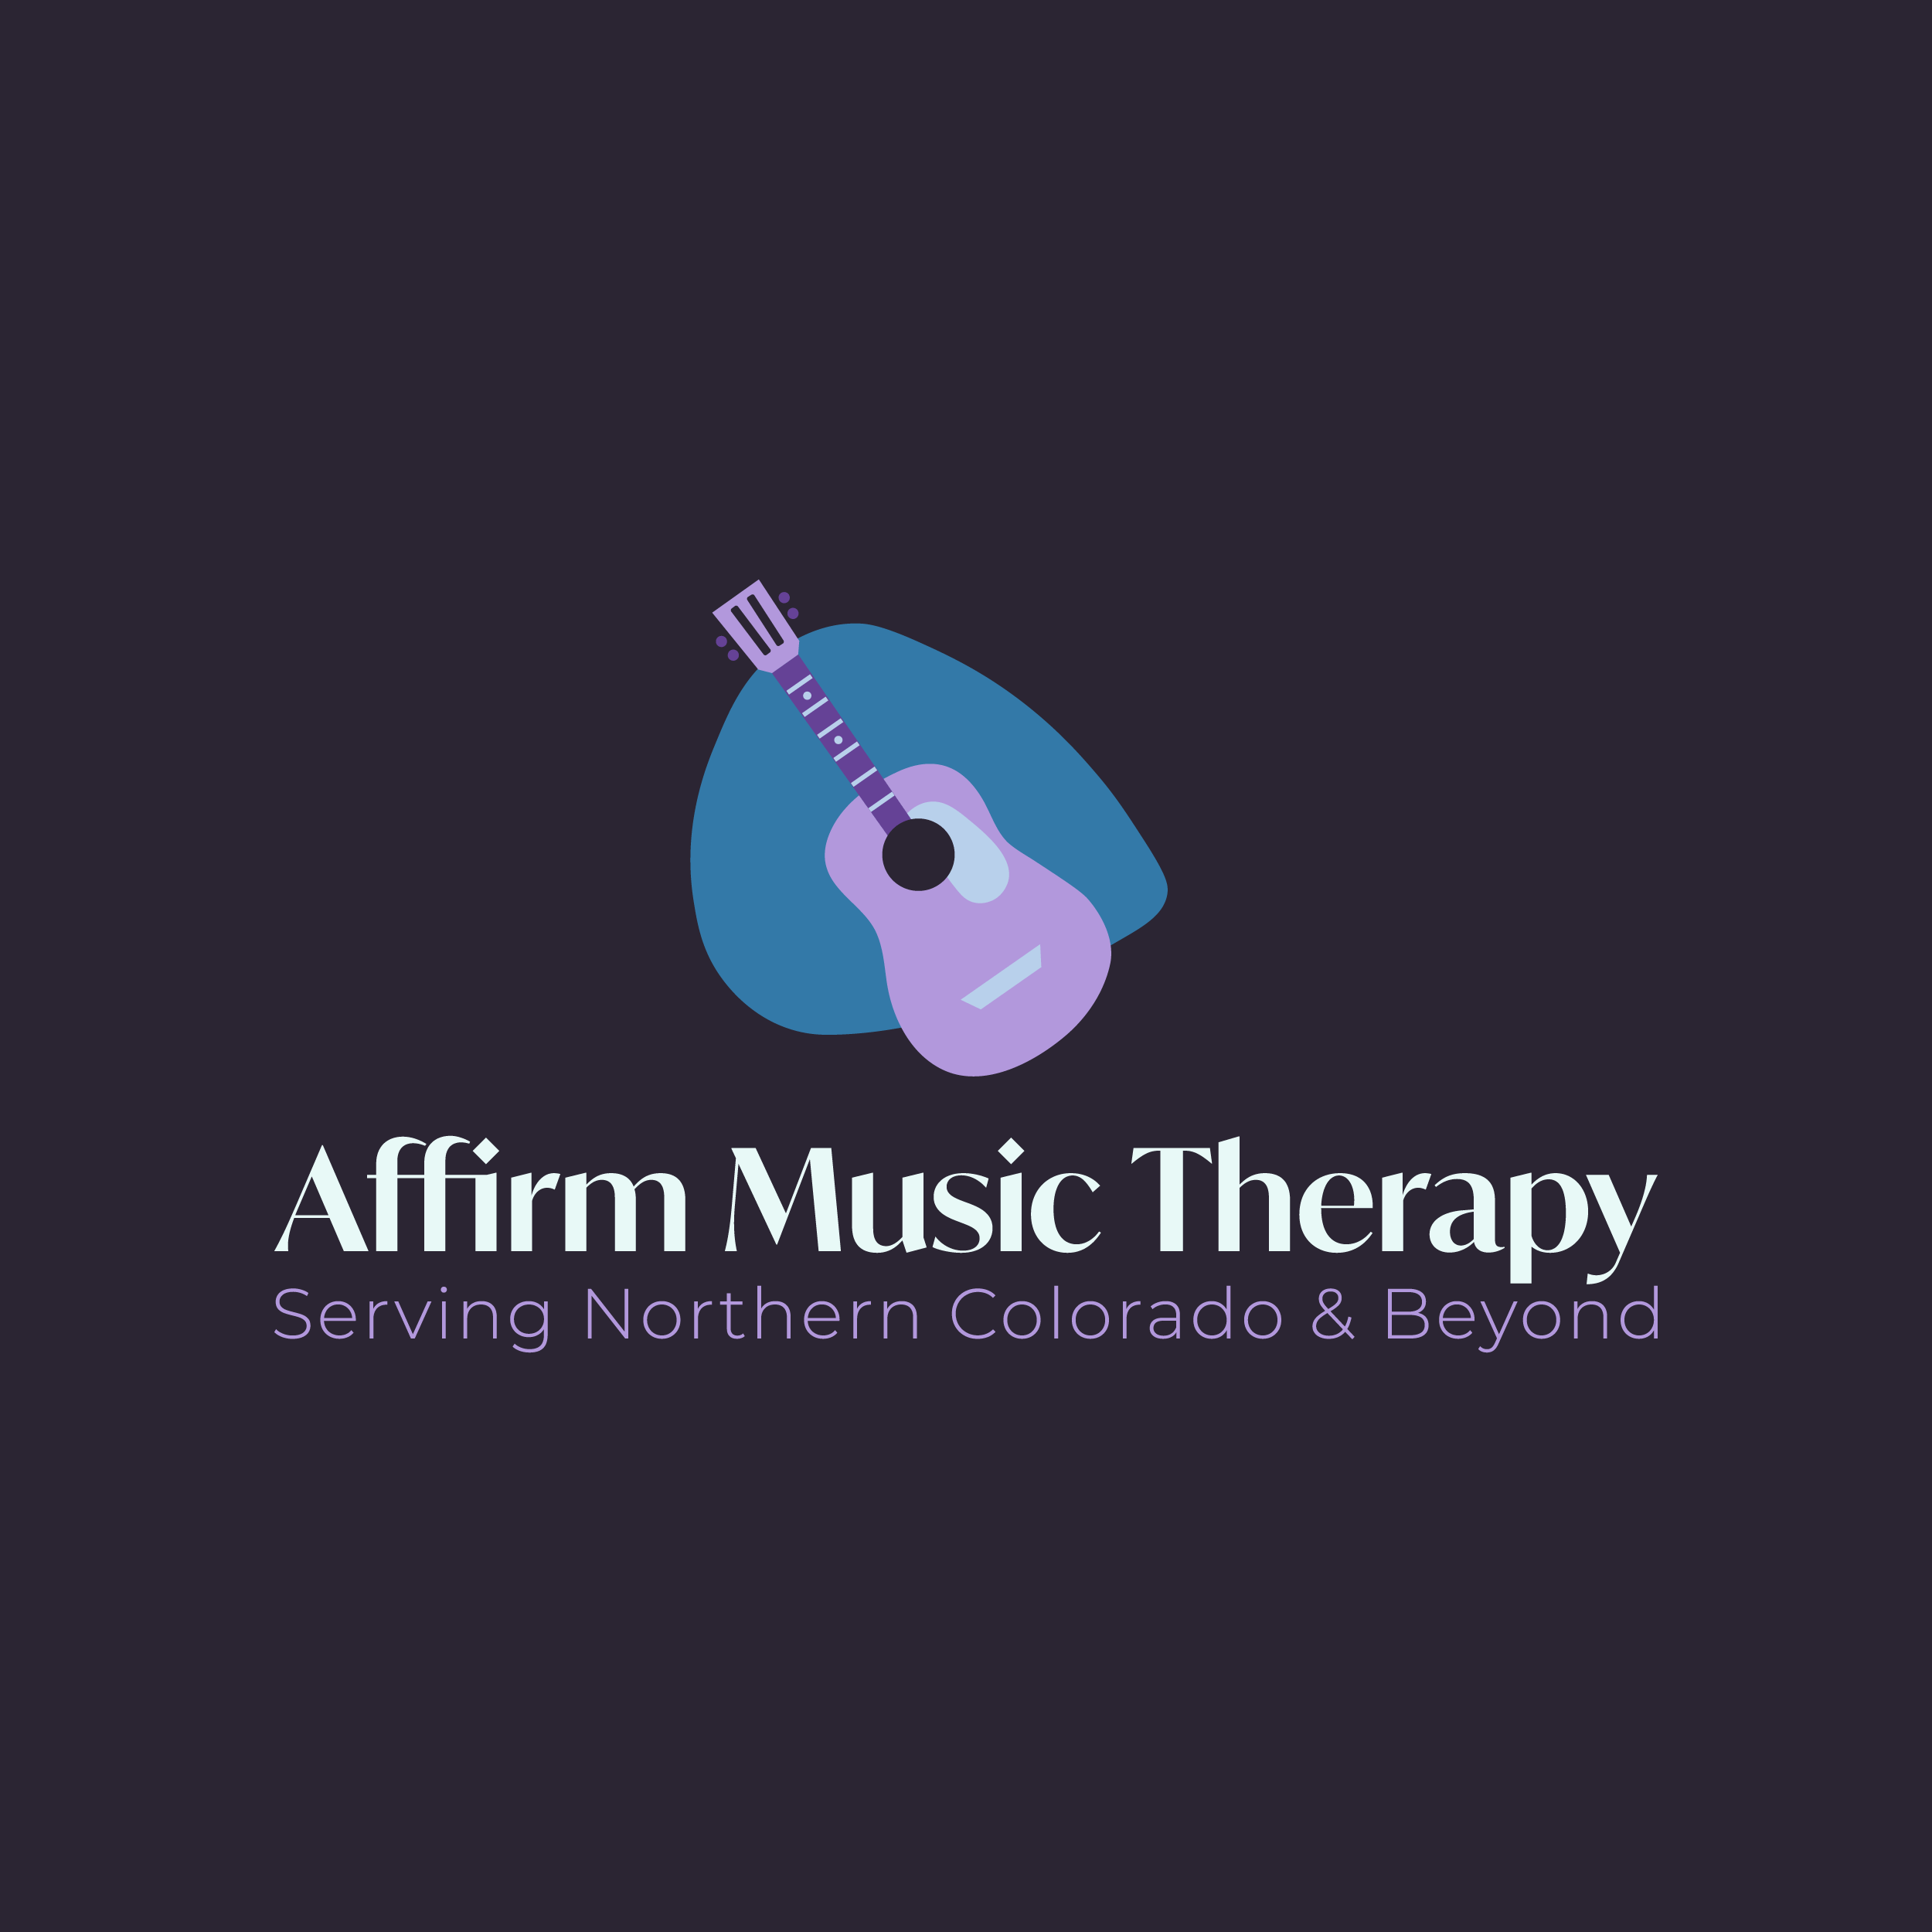 Main logo mark for Fort Collins Music Therapist by Denver website and brand designers Agave Studio